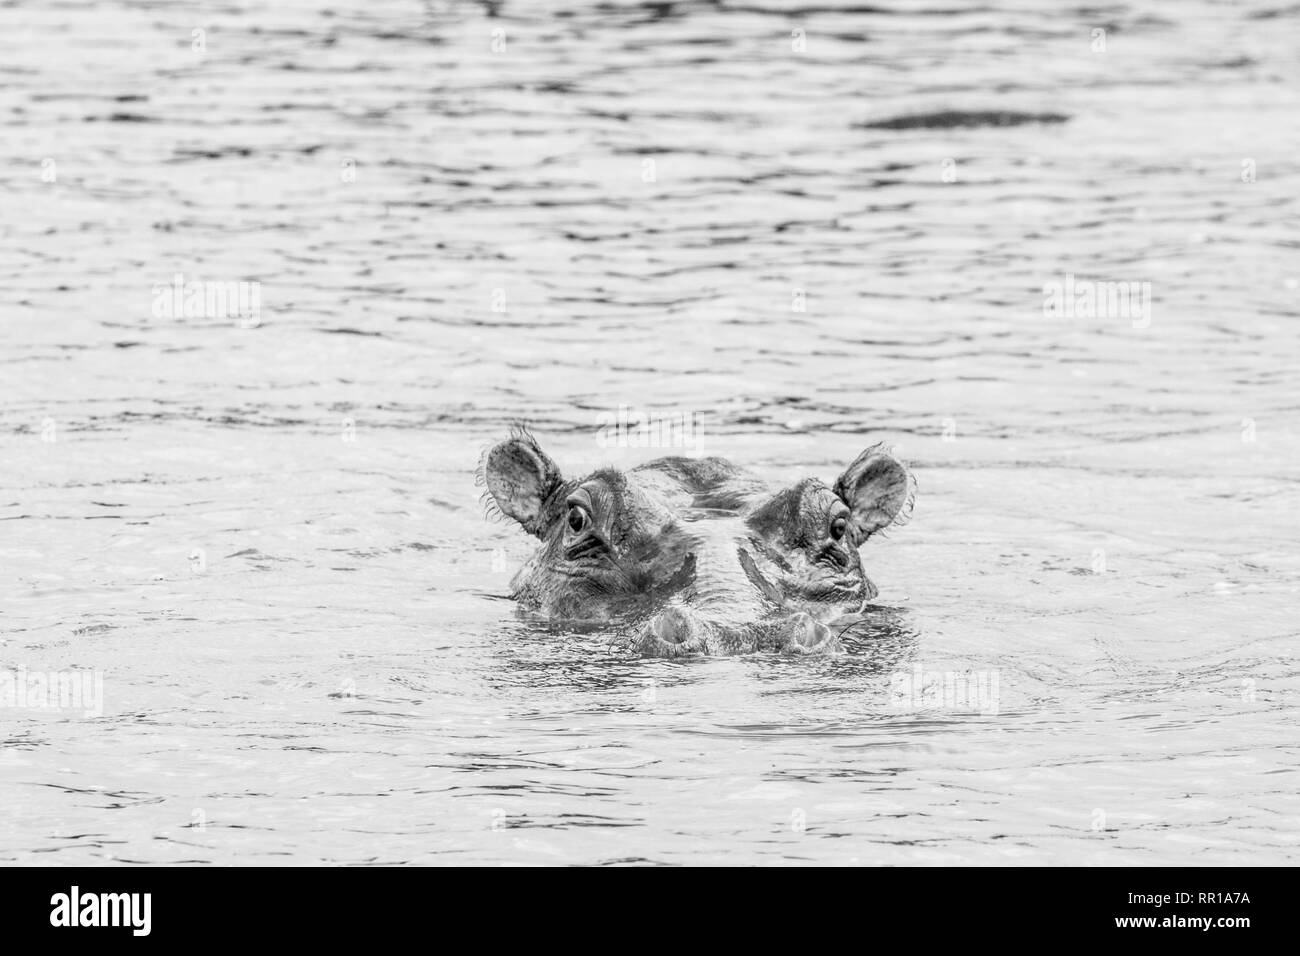 A hippo submerged in the Kazinga channel with just its head visible Queen Elizabeth National Park, Uganda. In black and white Stock Photo